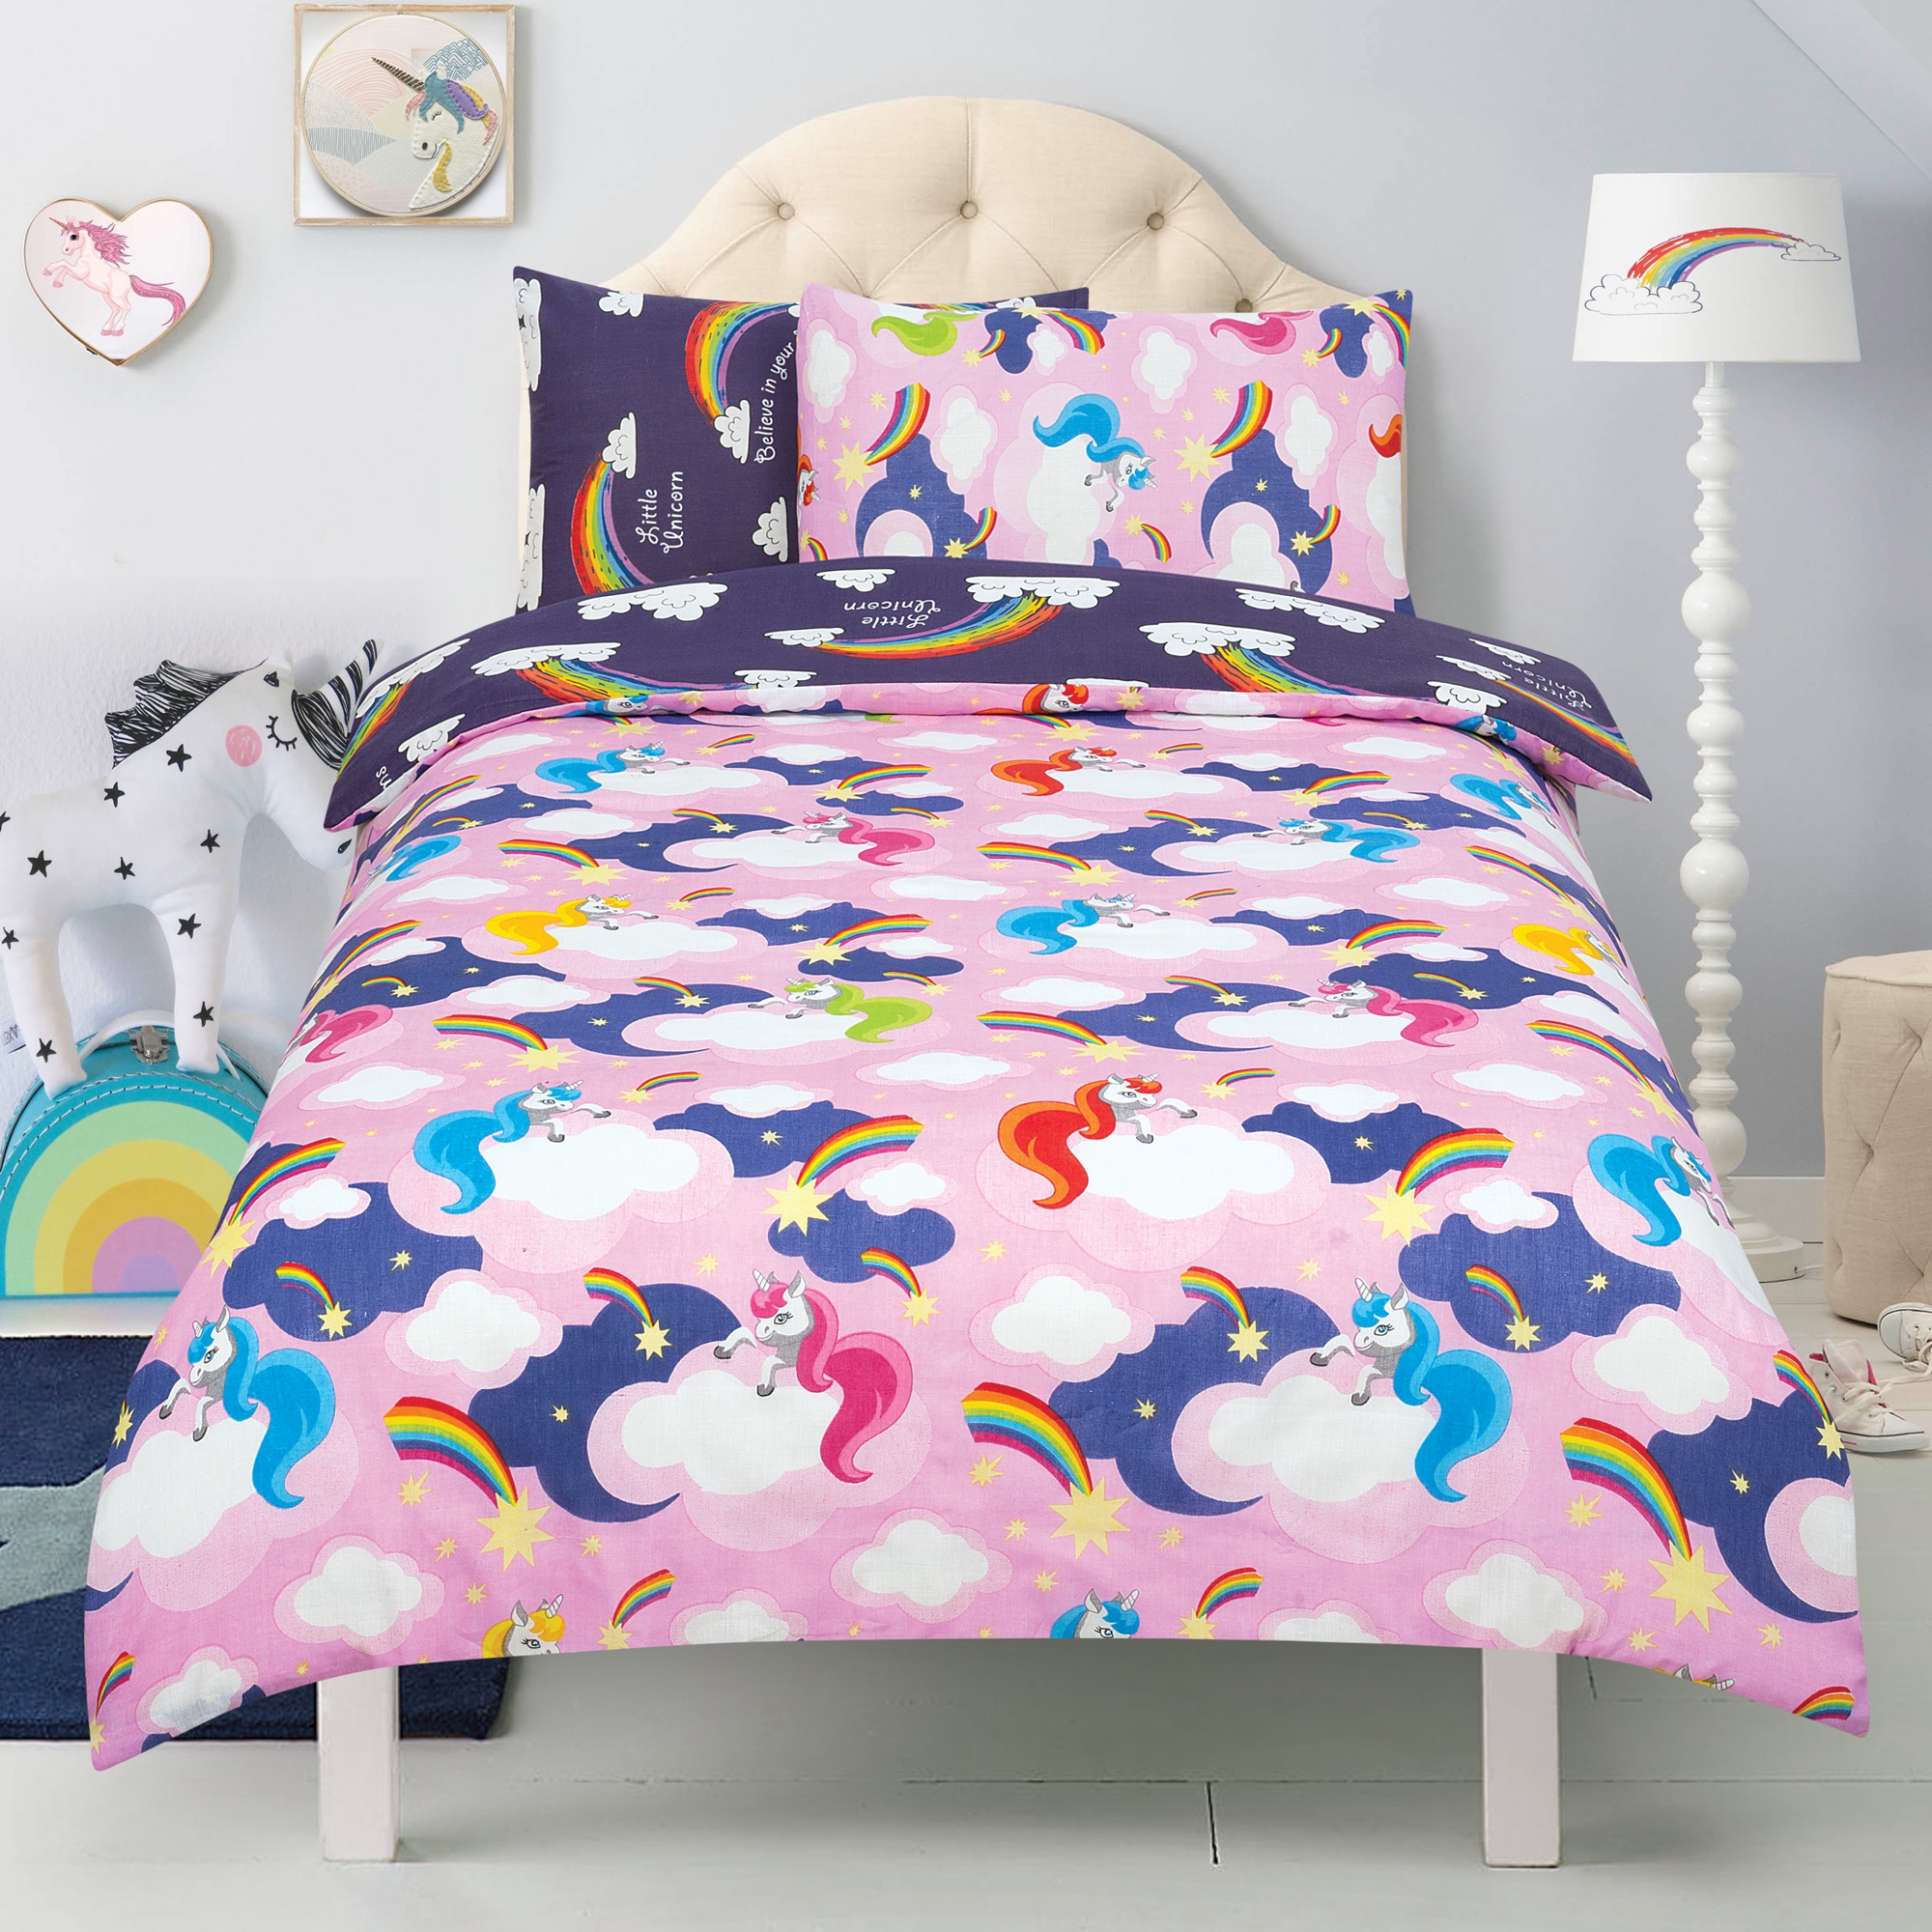 Unicorn 'Believe In Your Dreams' Baby Pink Reversible Purple Rotary Single Bed Duvet Quilt Cover Se